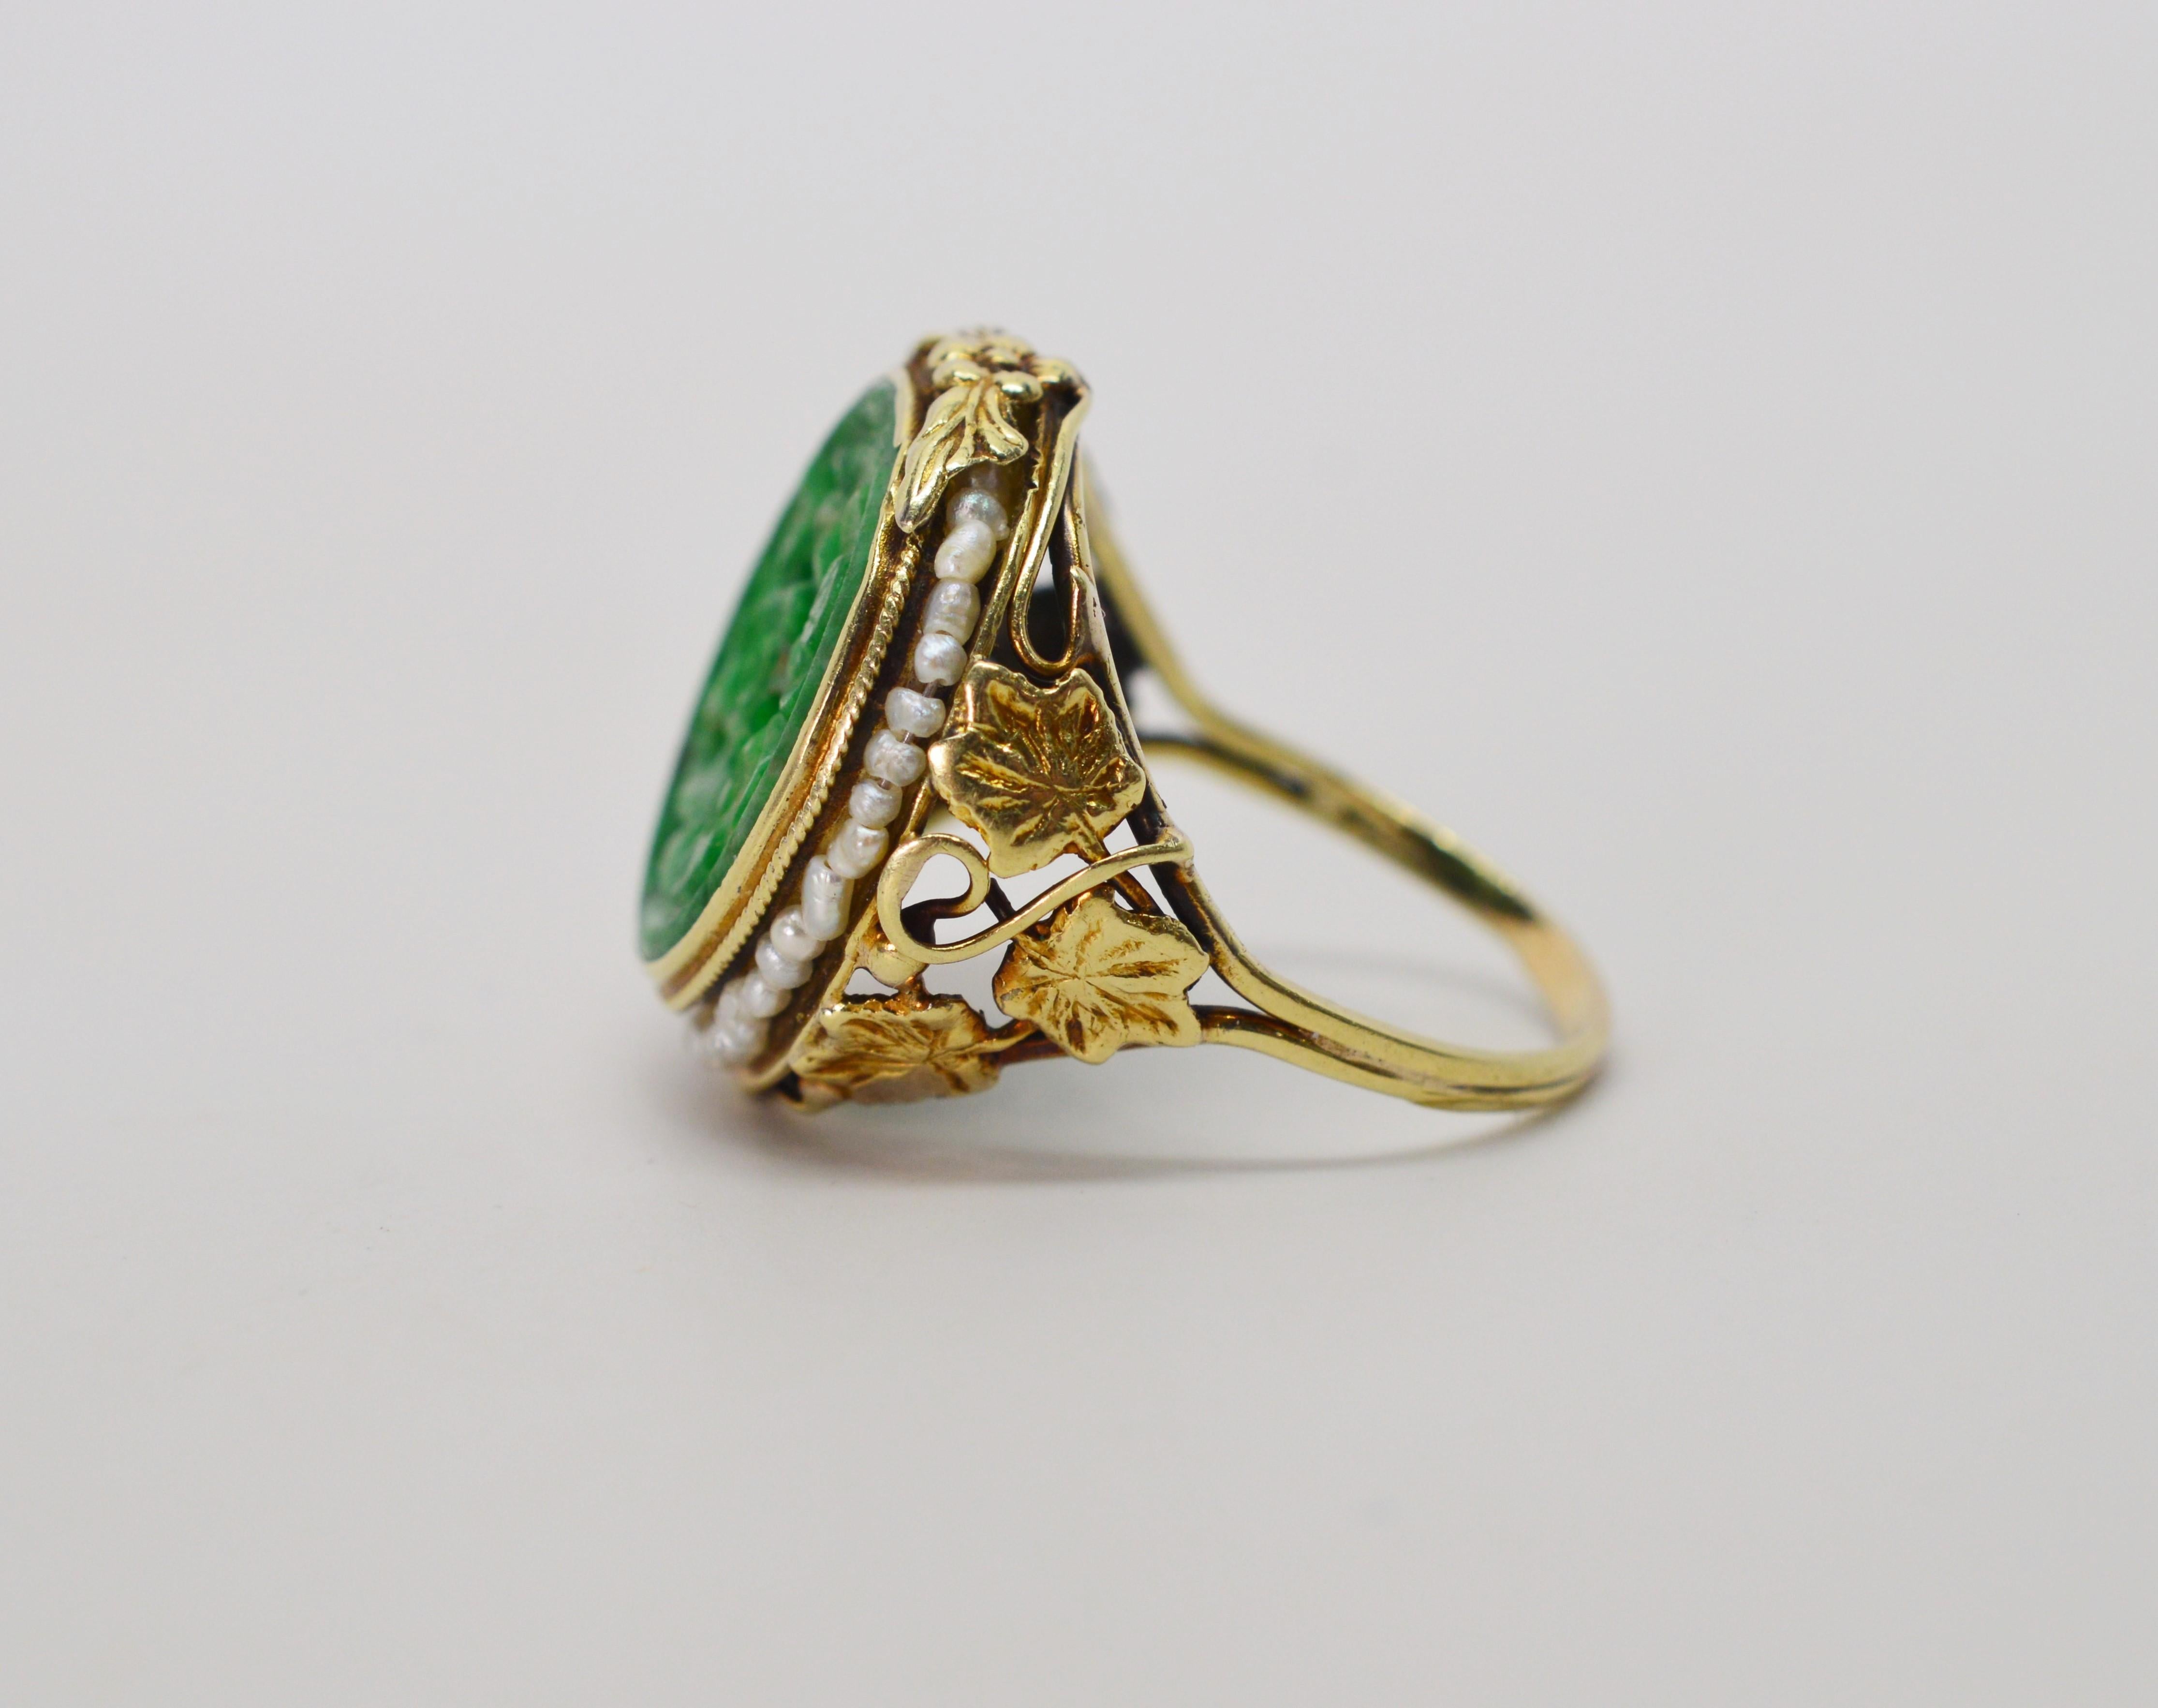 Artful leaves and vines in fourteen karat yellow gold intertwine on the shank of this hand-crafted ring which features a center of placket hand-carved sage green Jade accented with wreath of petite pearls. In ring size 7.5. 